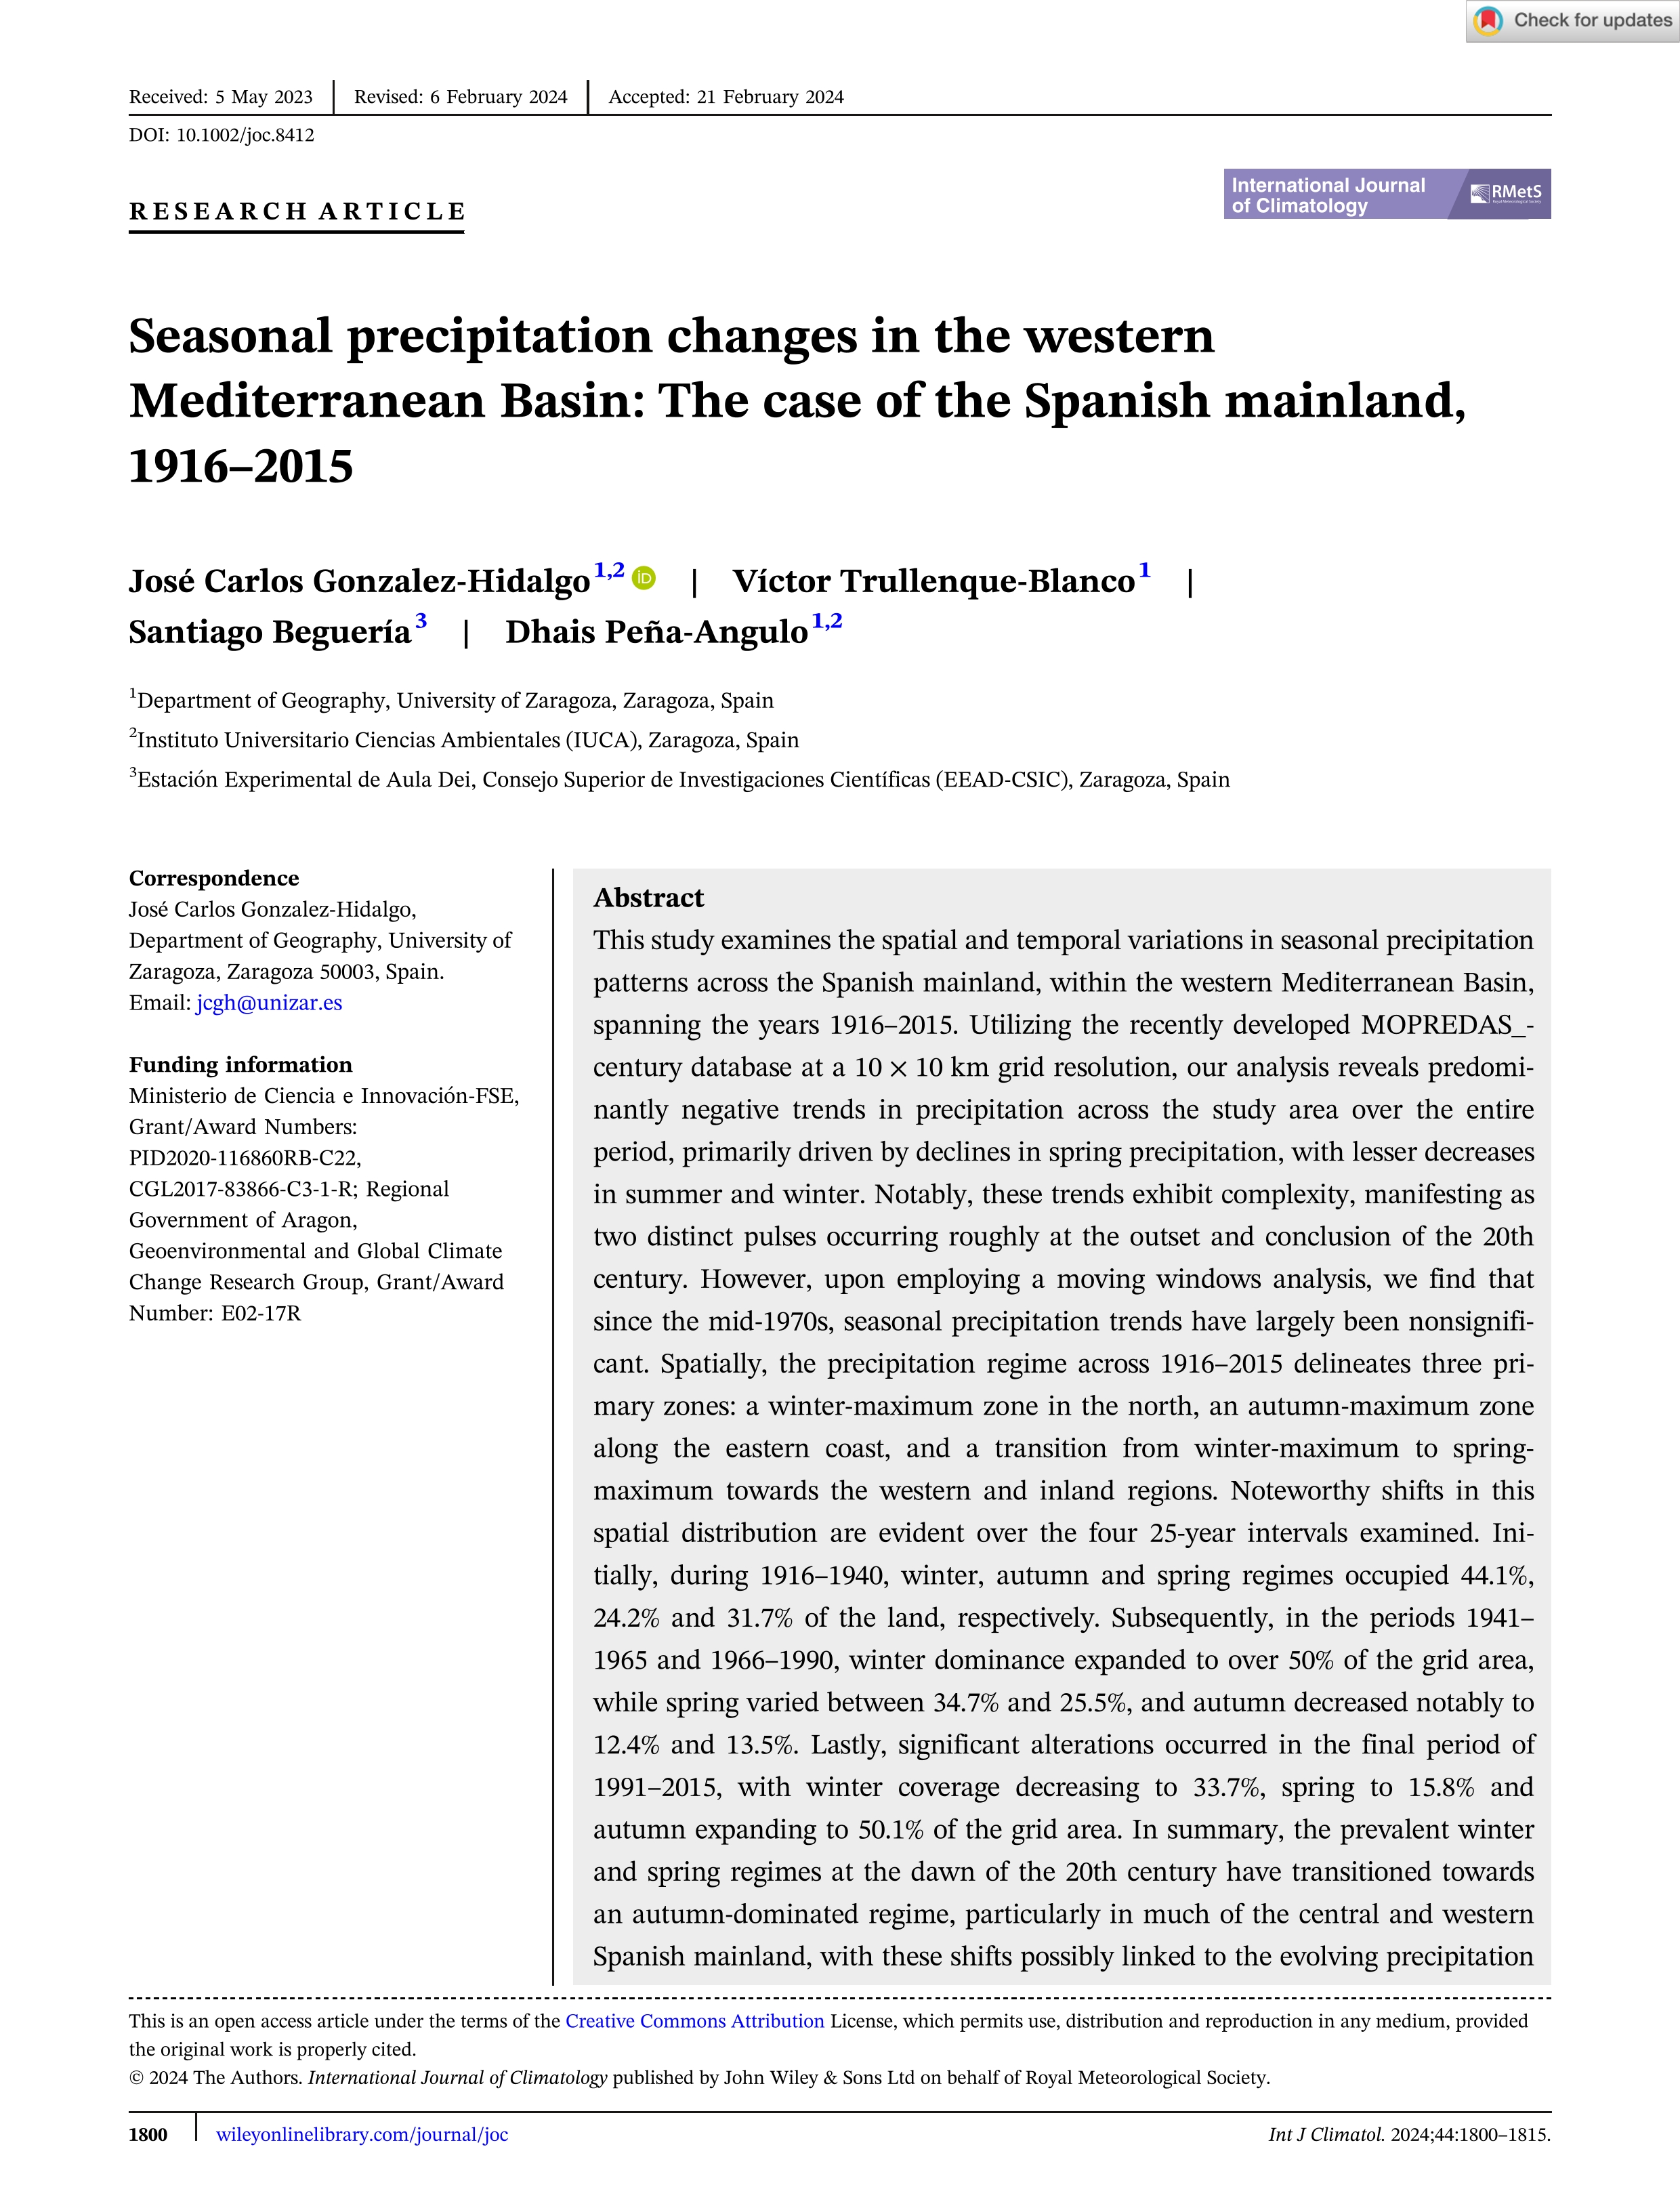 Seasonal precipitation changes in the western Mediterranean Basin: The case of the Spanish mainland, 1916–2015